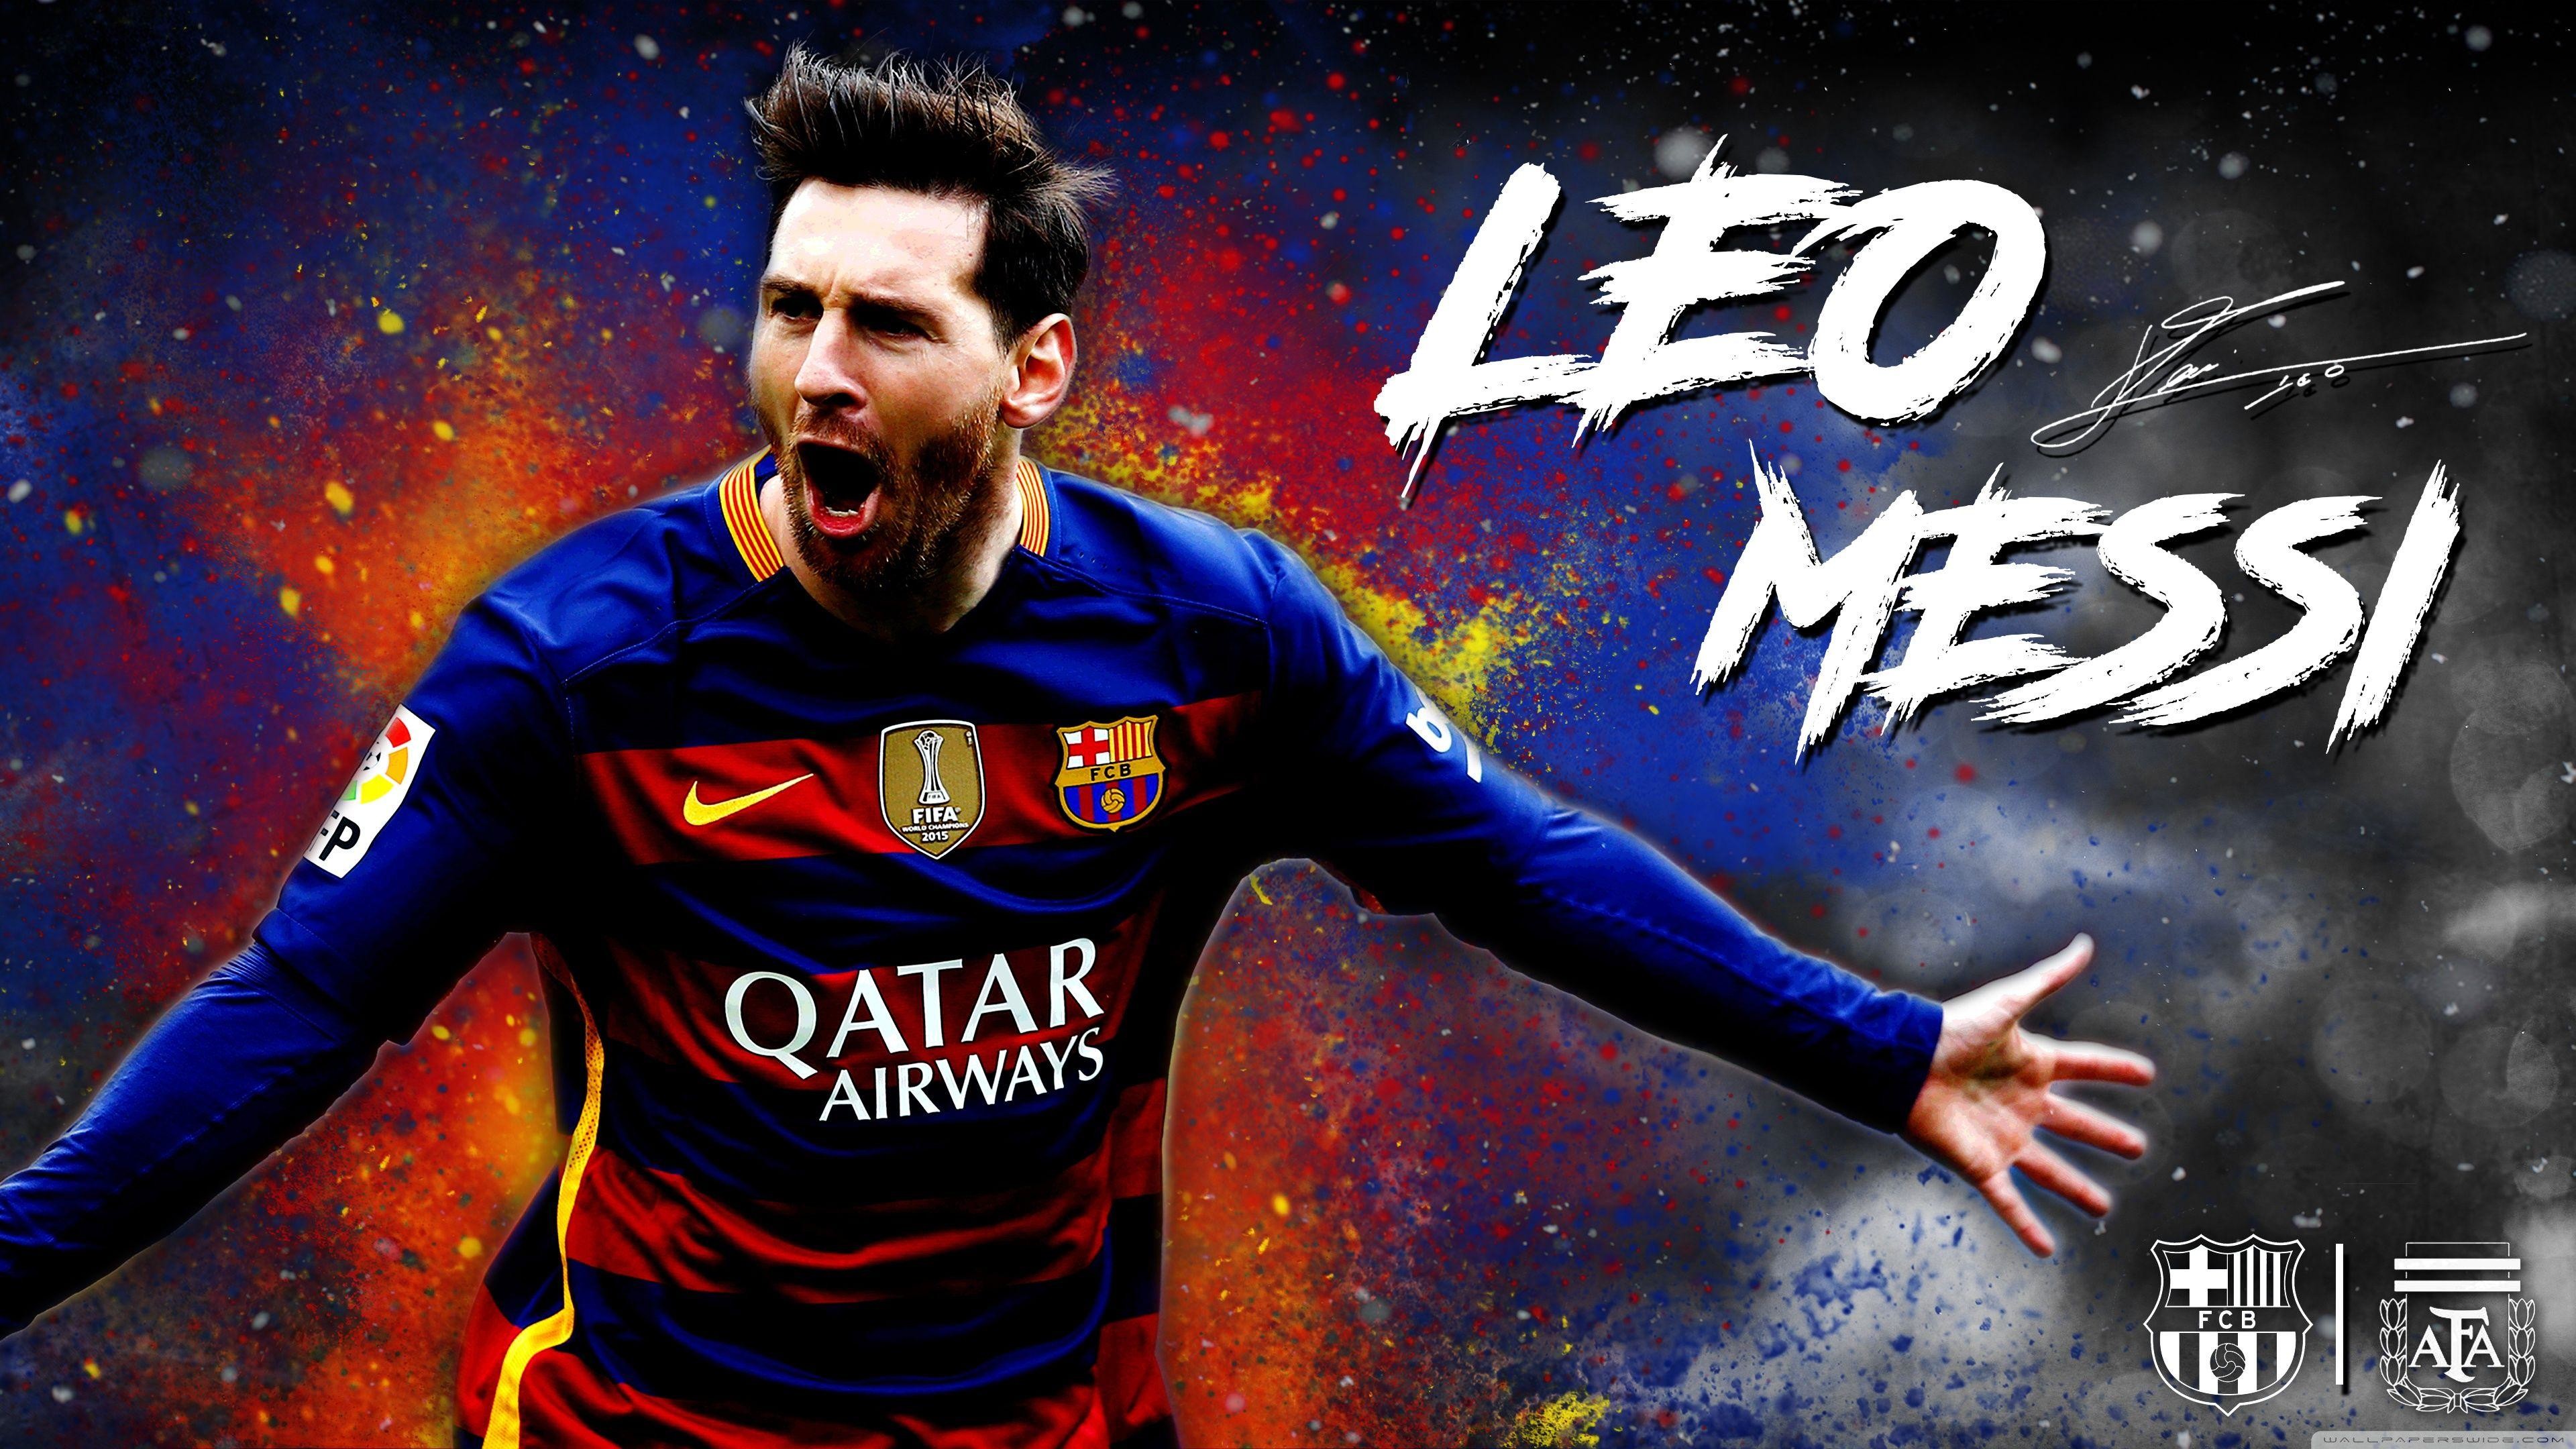 Lionel Messi Wallpaper (best Lionel Messi Wallpaper and image) on WallpaperChat